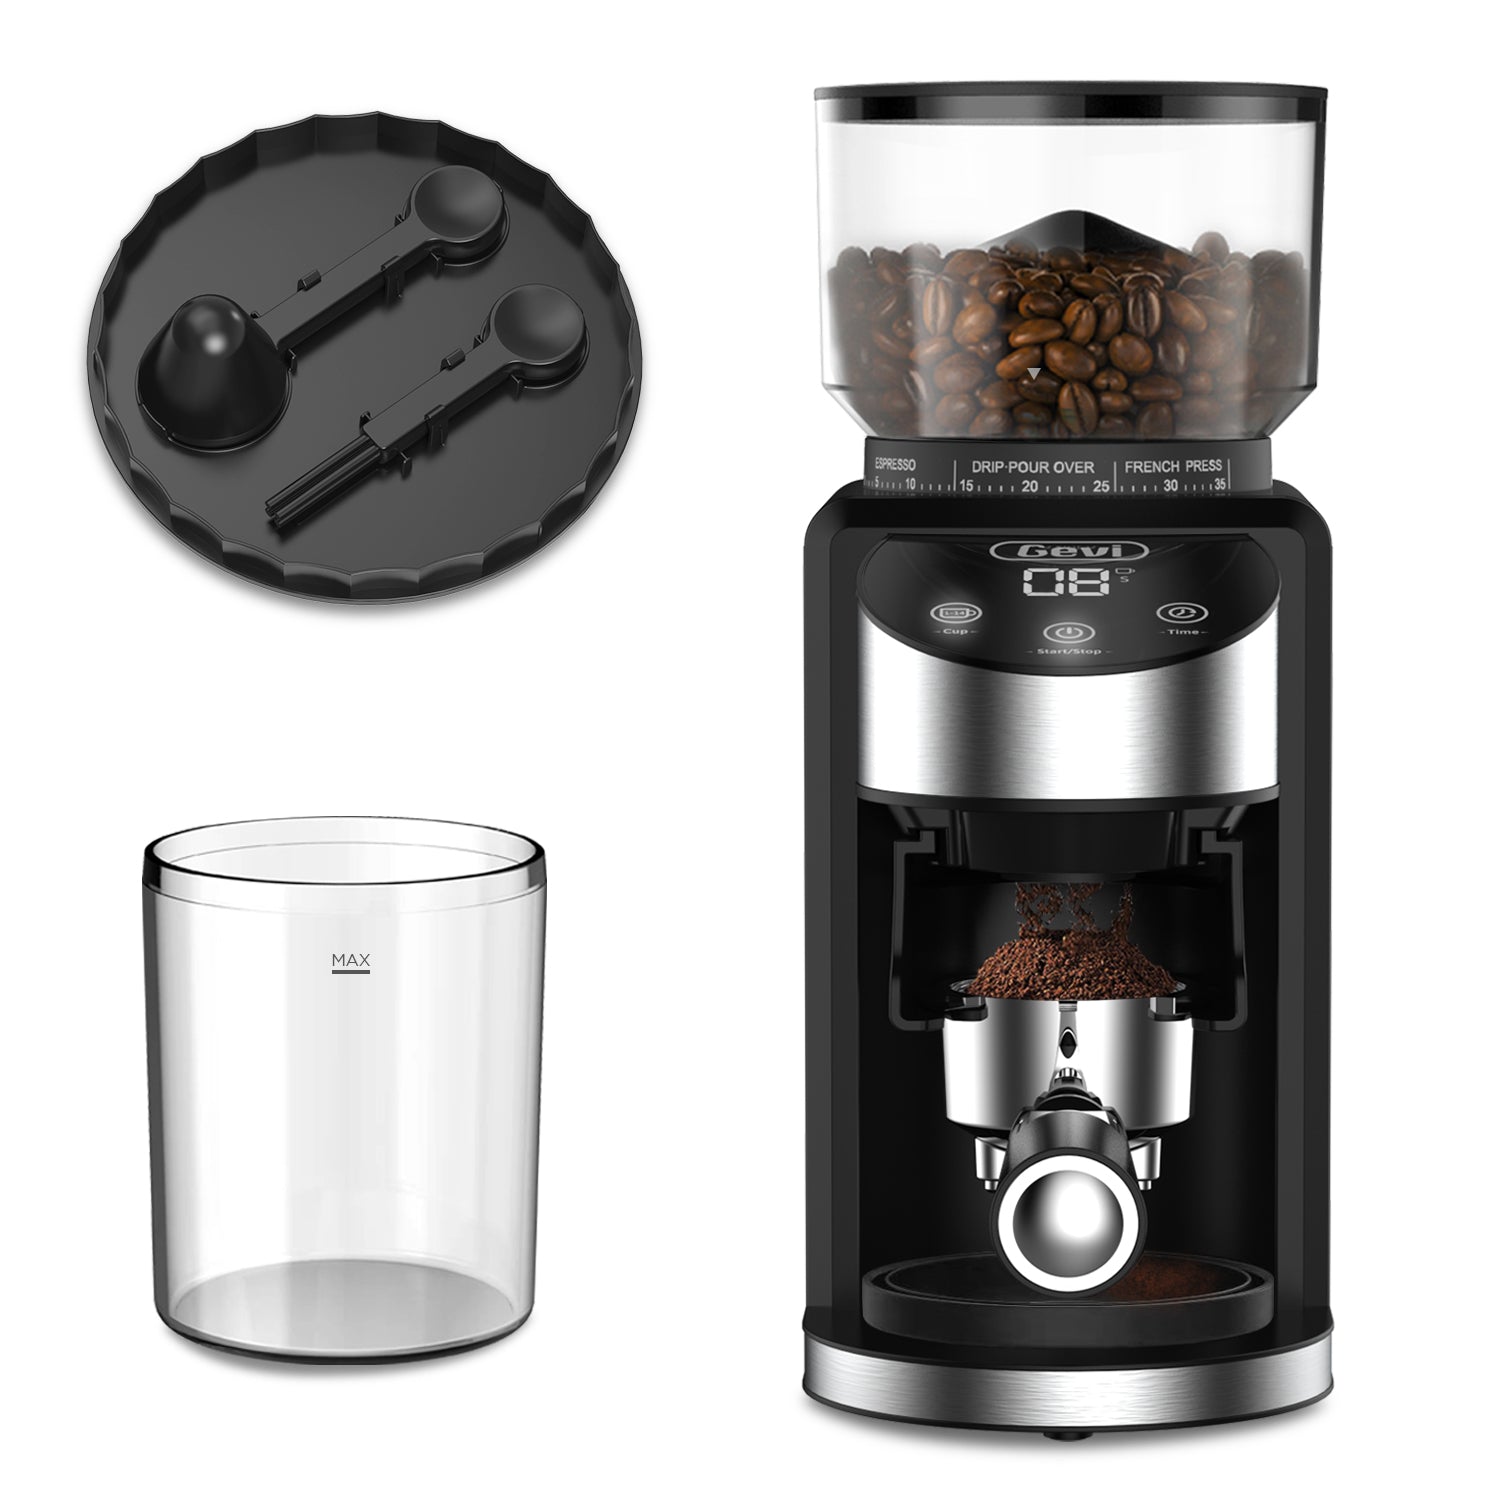 Sboly Electric Burr Coffee Grinder with 18 Grind Settings, Adjustable Burr Mill Coffee Bean Grinder for Espresso, Drip Coffee, French Press and